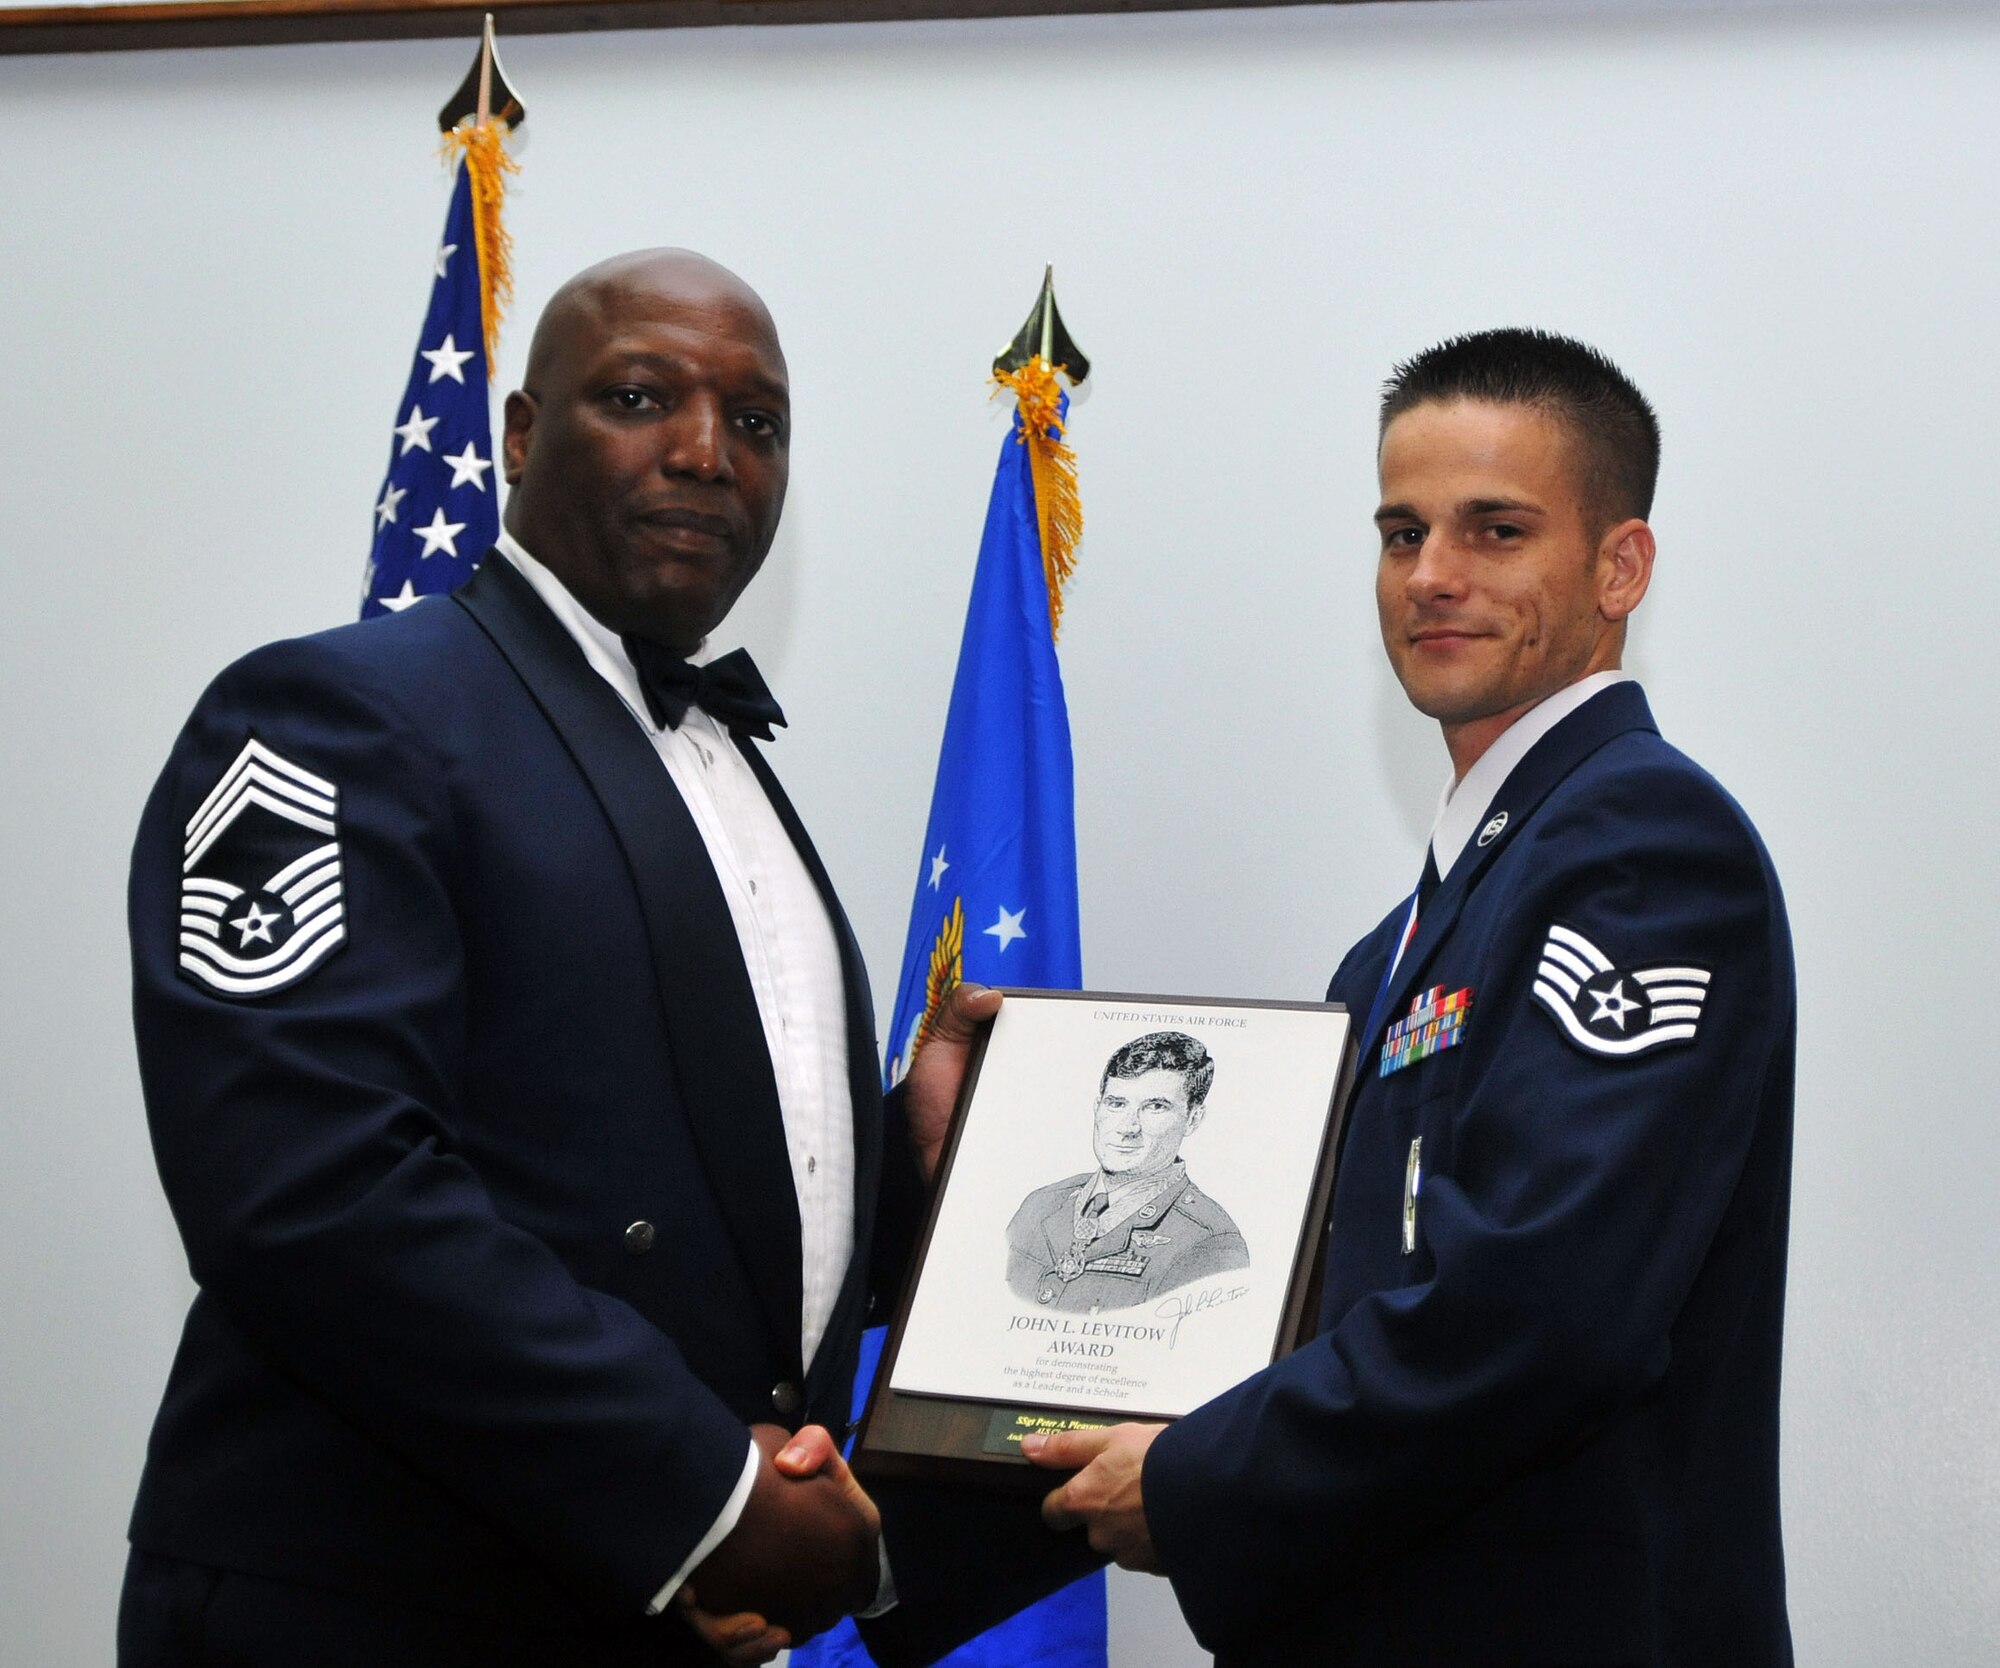 ANDERSEN AIR FORCE BASE, Guam - Staff Sgt. Peter Pleasanton, 36th Munitions Squadron, is presented with the Levitow Award during the Airman Leadership graduation ceremony here March 25. The Levitow Award is presented to the Airman Leadership School graduate who excels in all aspects of the course including leadership, public speaking, academics, and drill. The award is named after John Levitow who received the Medal of Honor in 1970. (U.S. Air Force photo by Airman 1st Class Julian North)